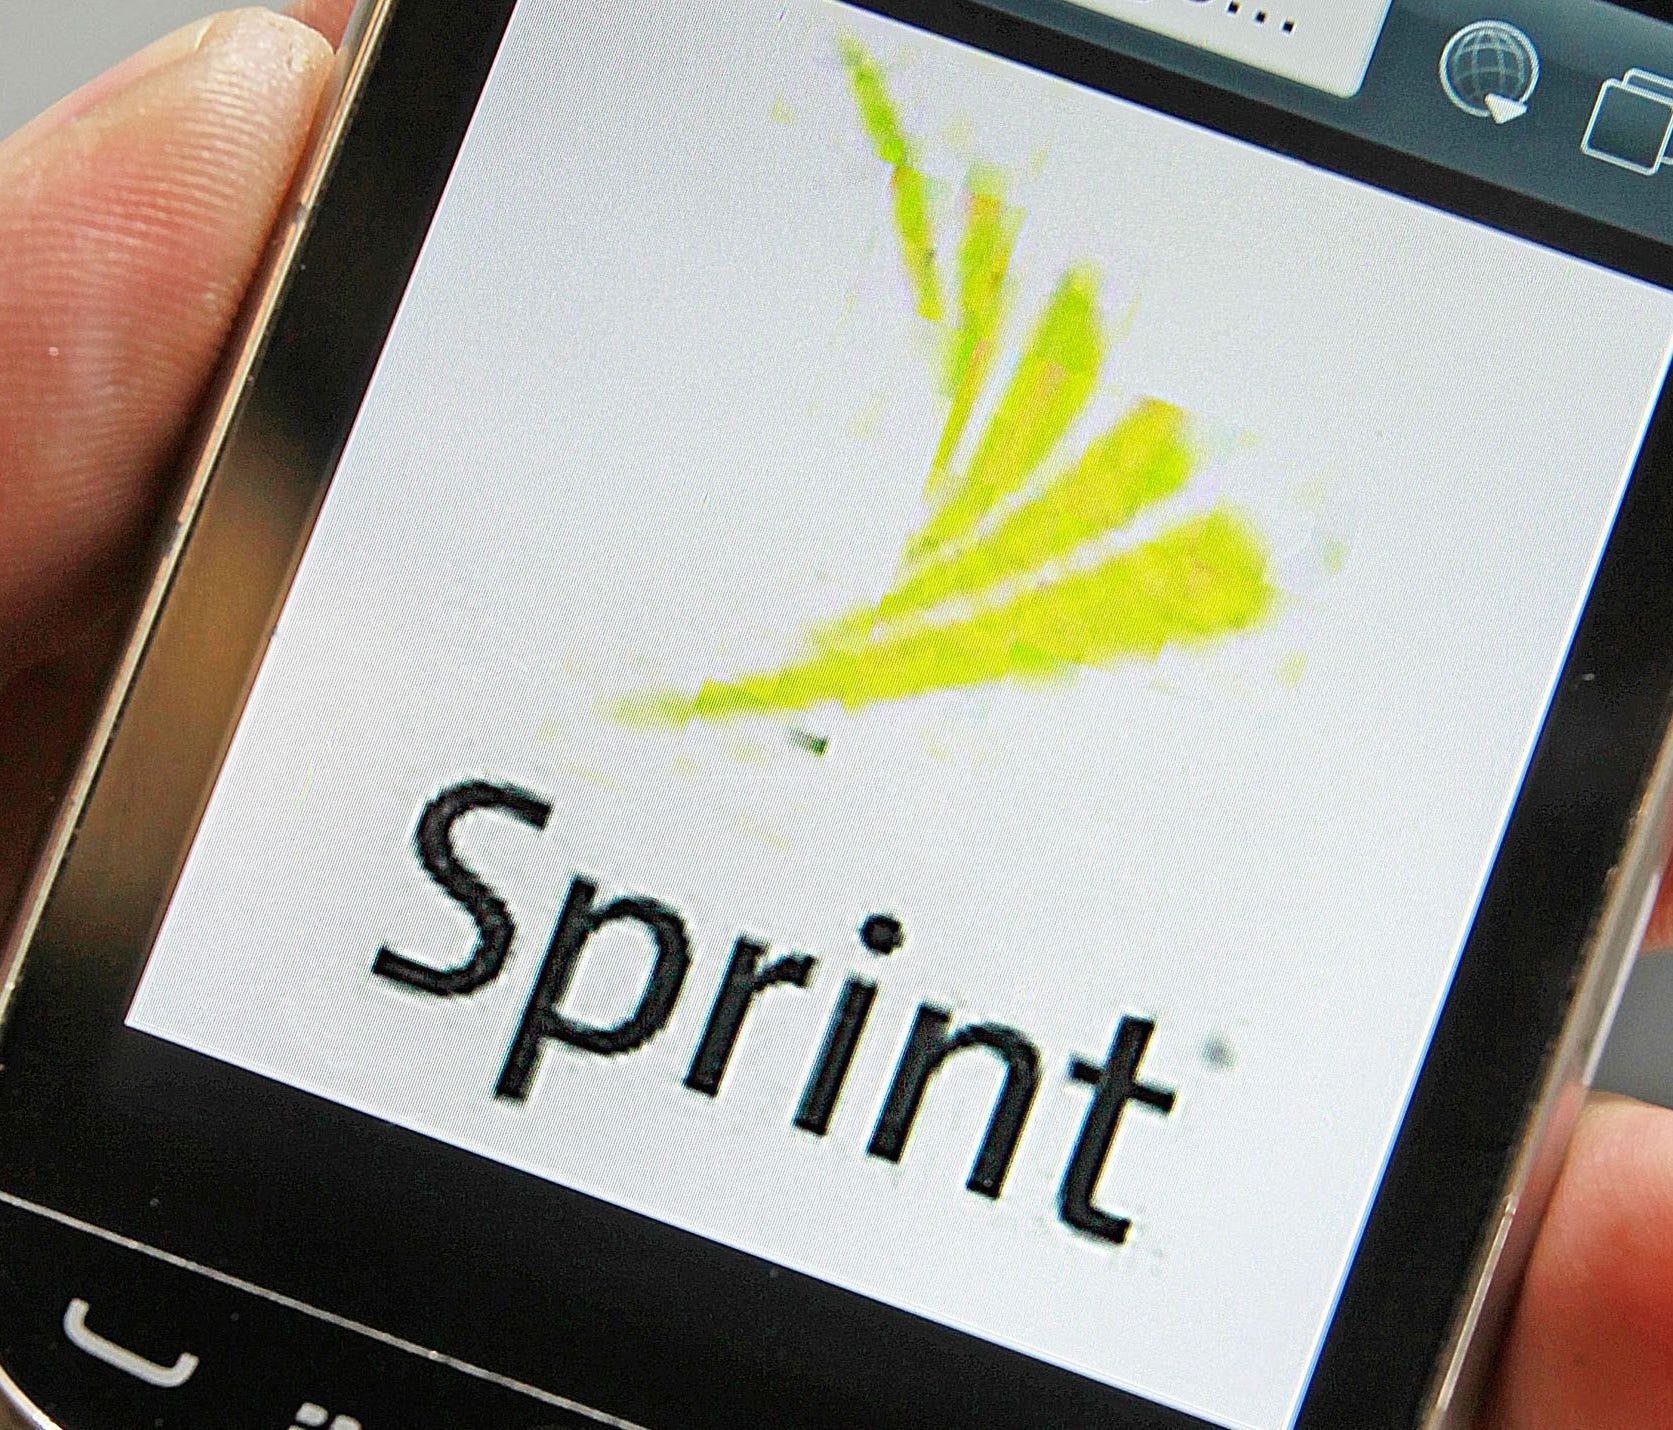 File photo taken in 2013 shows a Sprint logo is displayed on a smart phone in Montpelier, Vt.